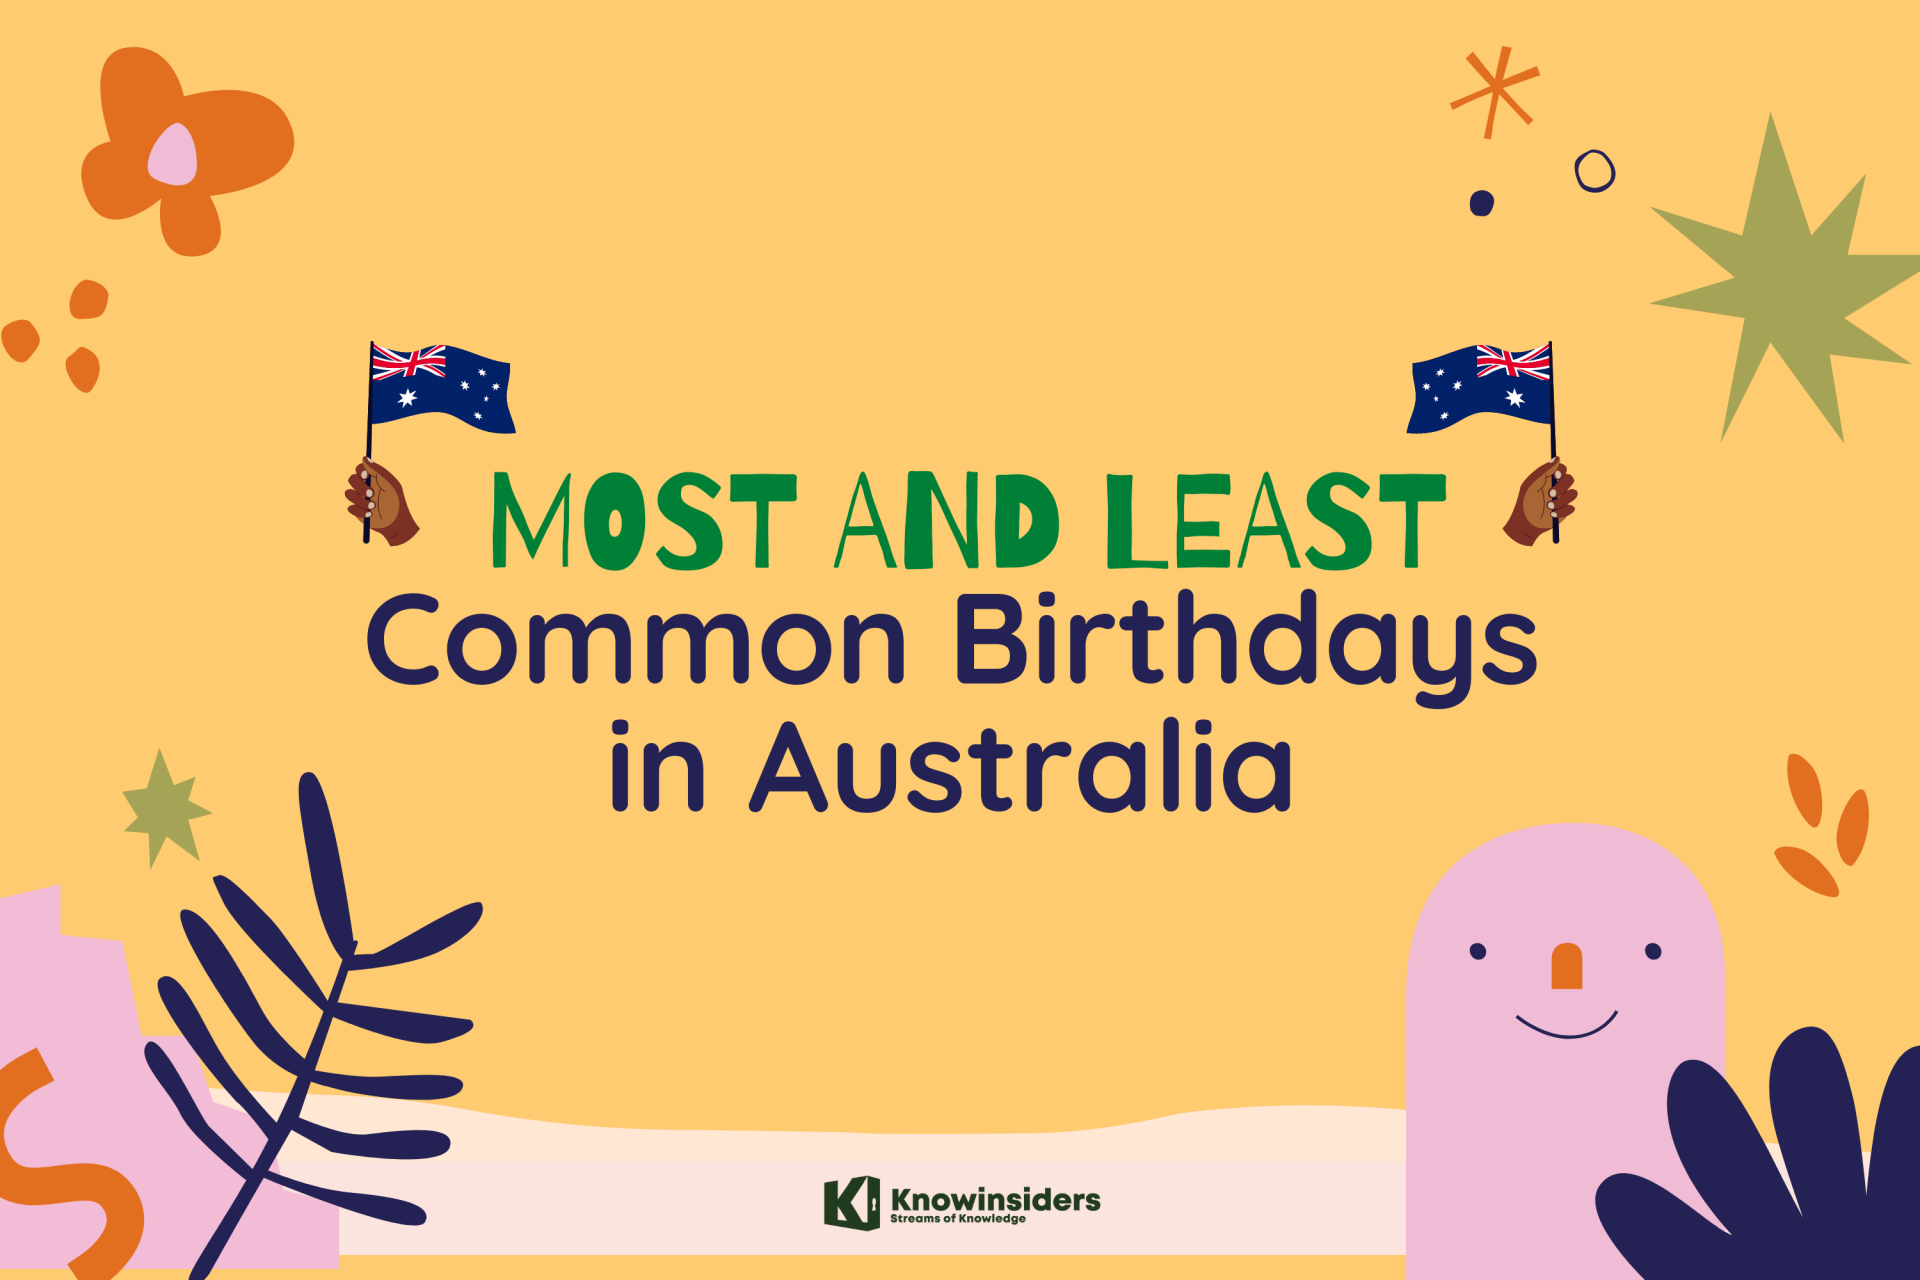 The Most and Least Common Birthdays for Australian Today